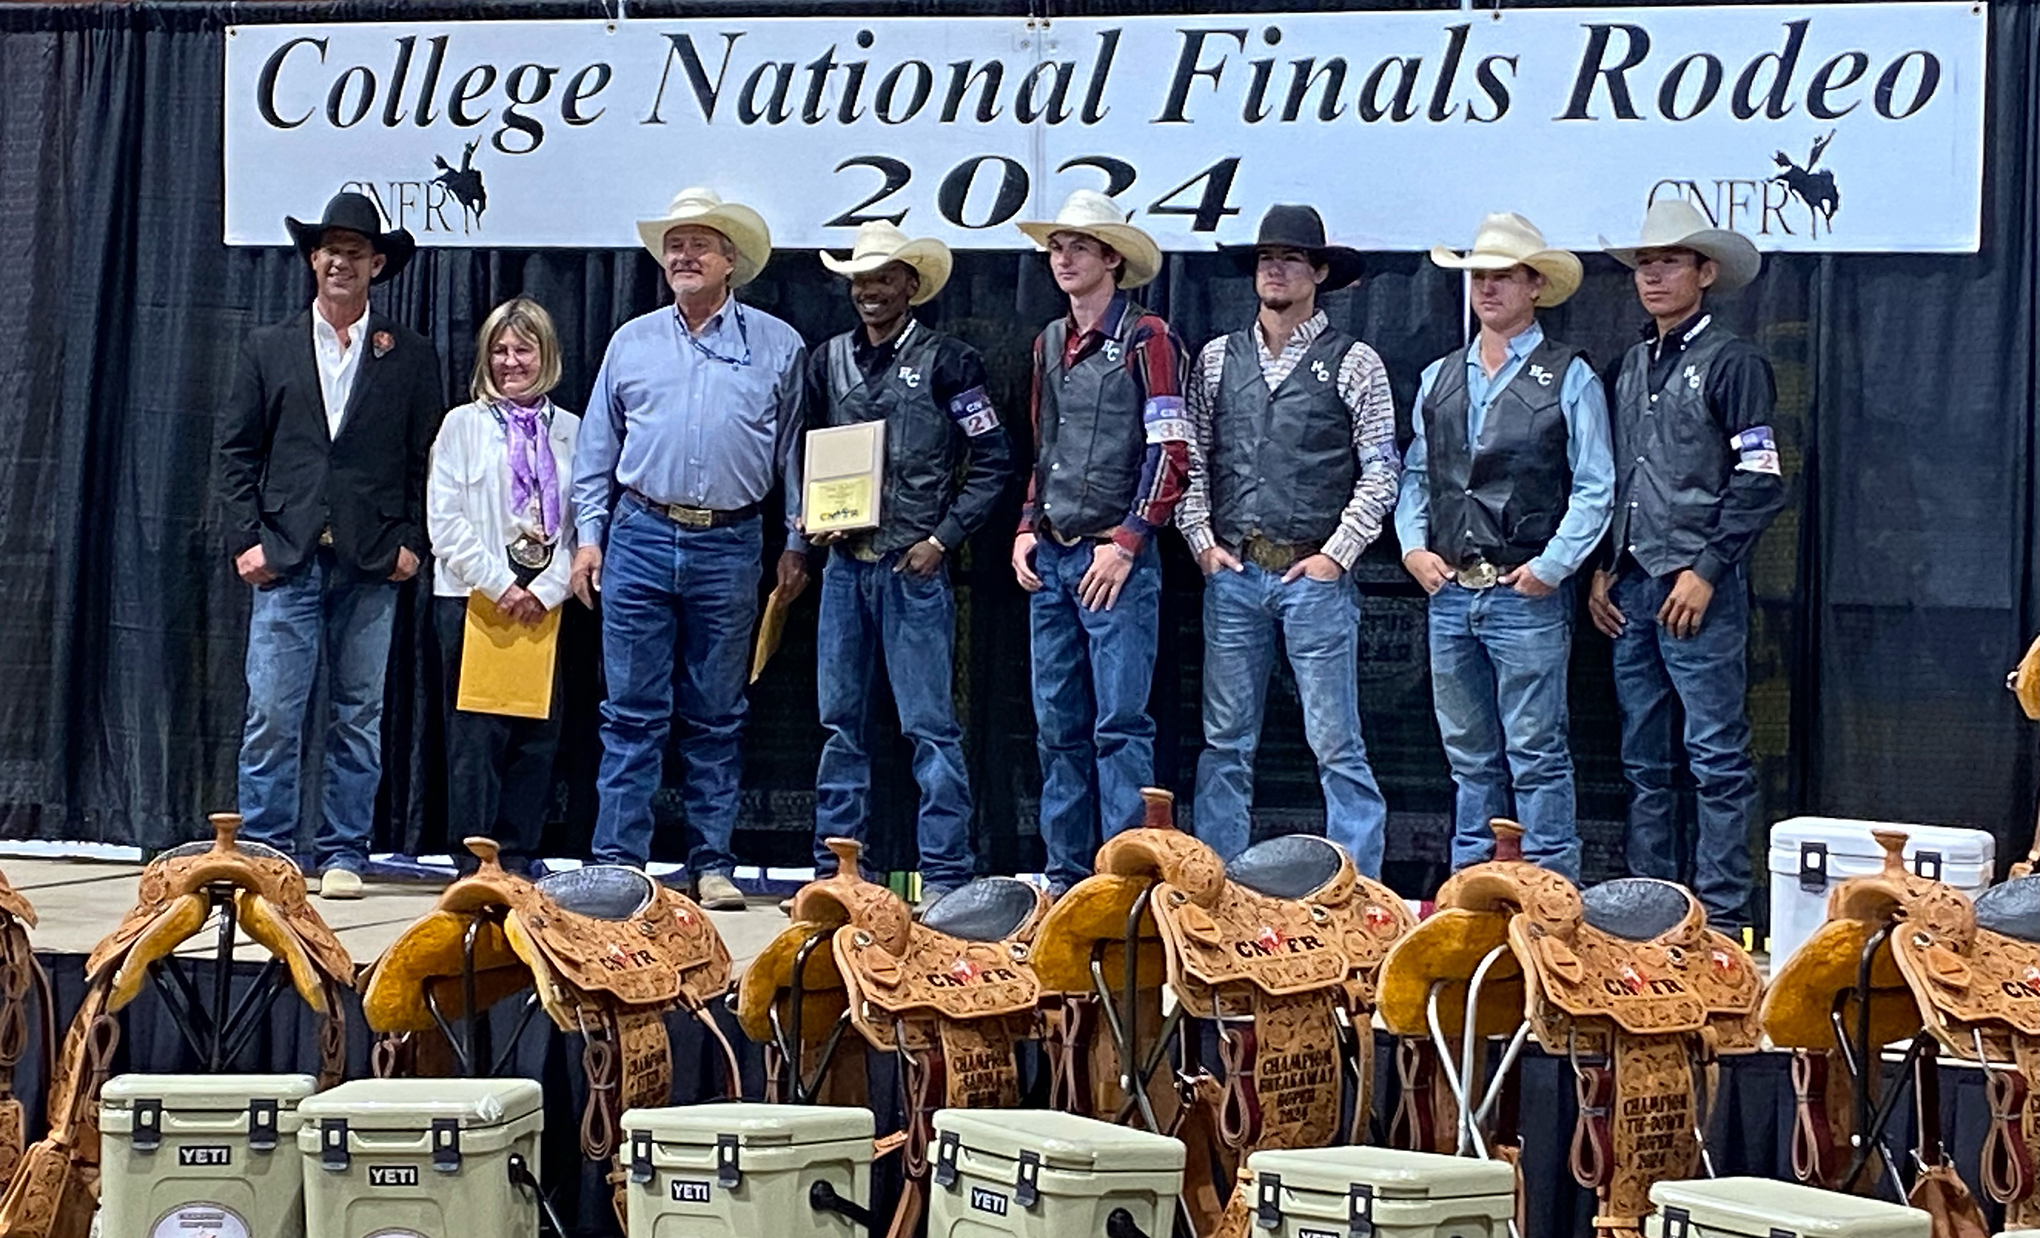 Hill College wins a pair of National Titles at the 2024 College National Finals Rodeo